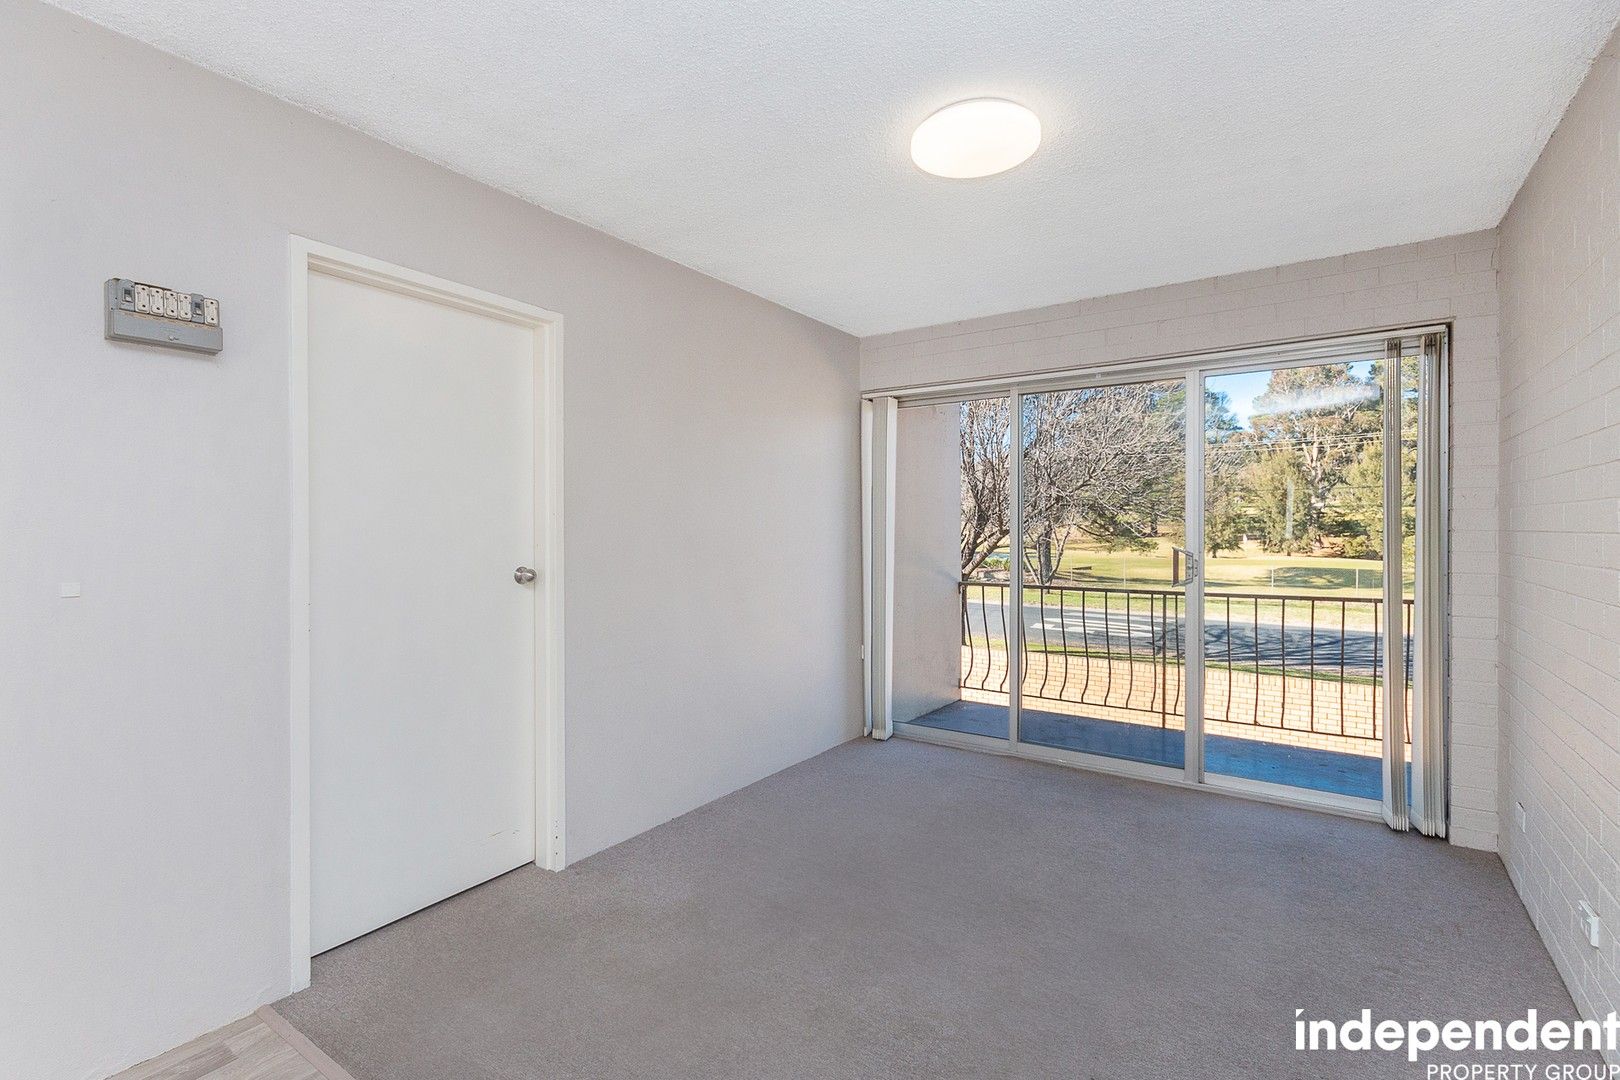 1 bedrooms Apartment / Unit / Flat in 2/63 Molonglo Street QUEANBEYAN EAST NSW, 2620